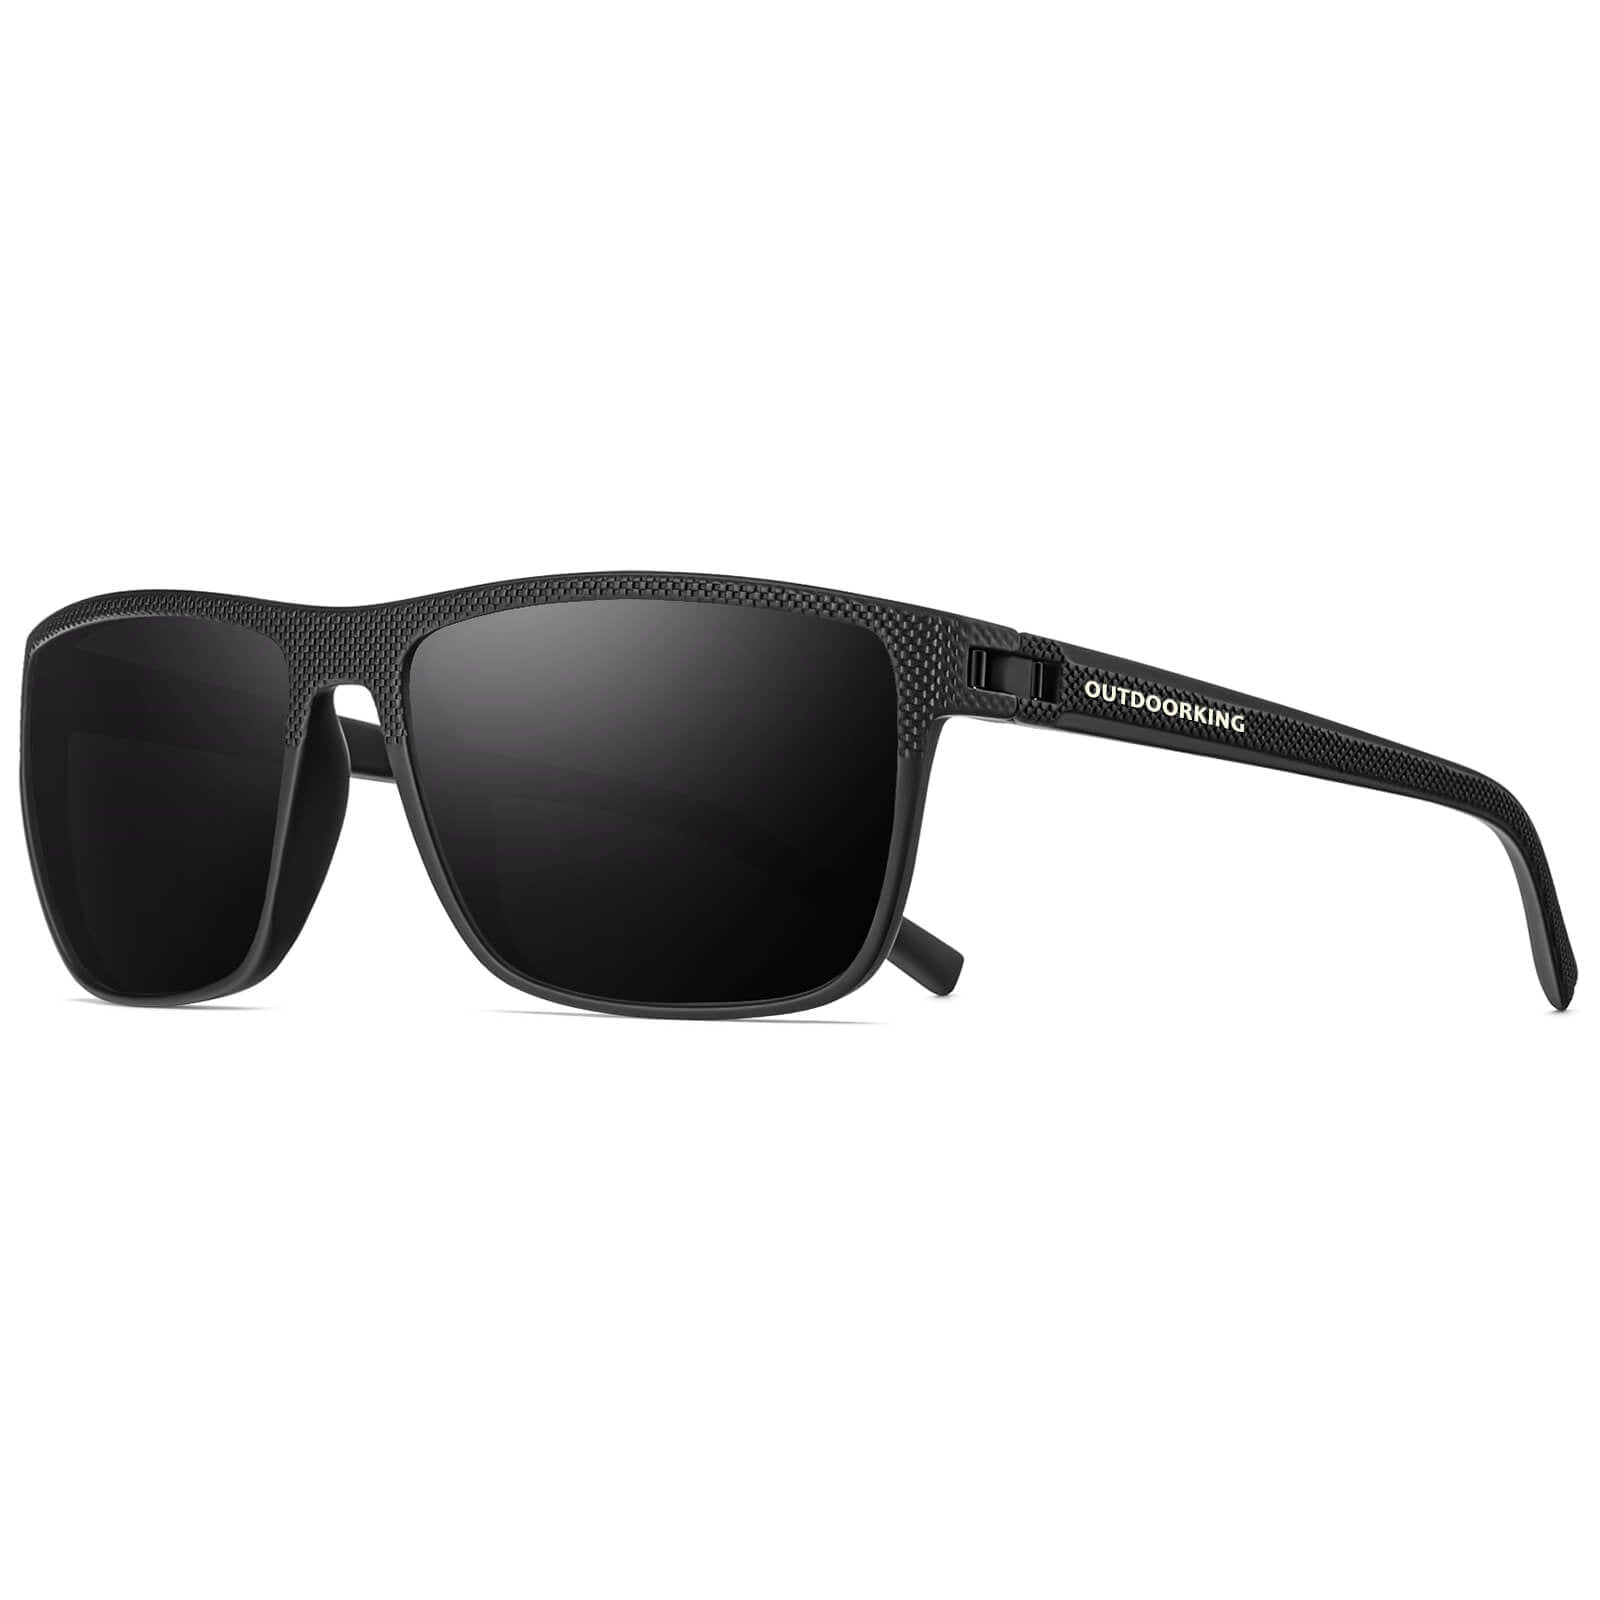 OUTDOORKING Classic Rectangle Sunglasses S45-1